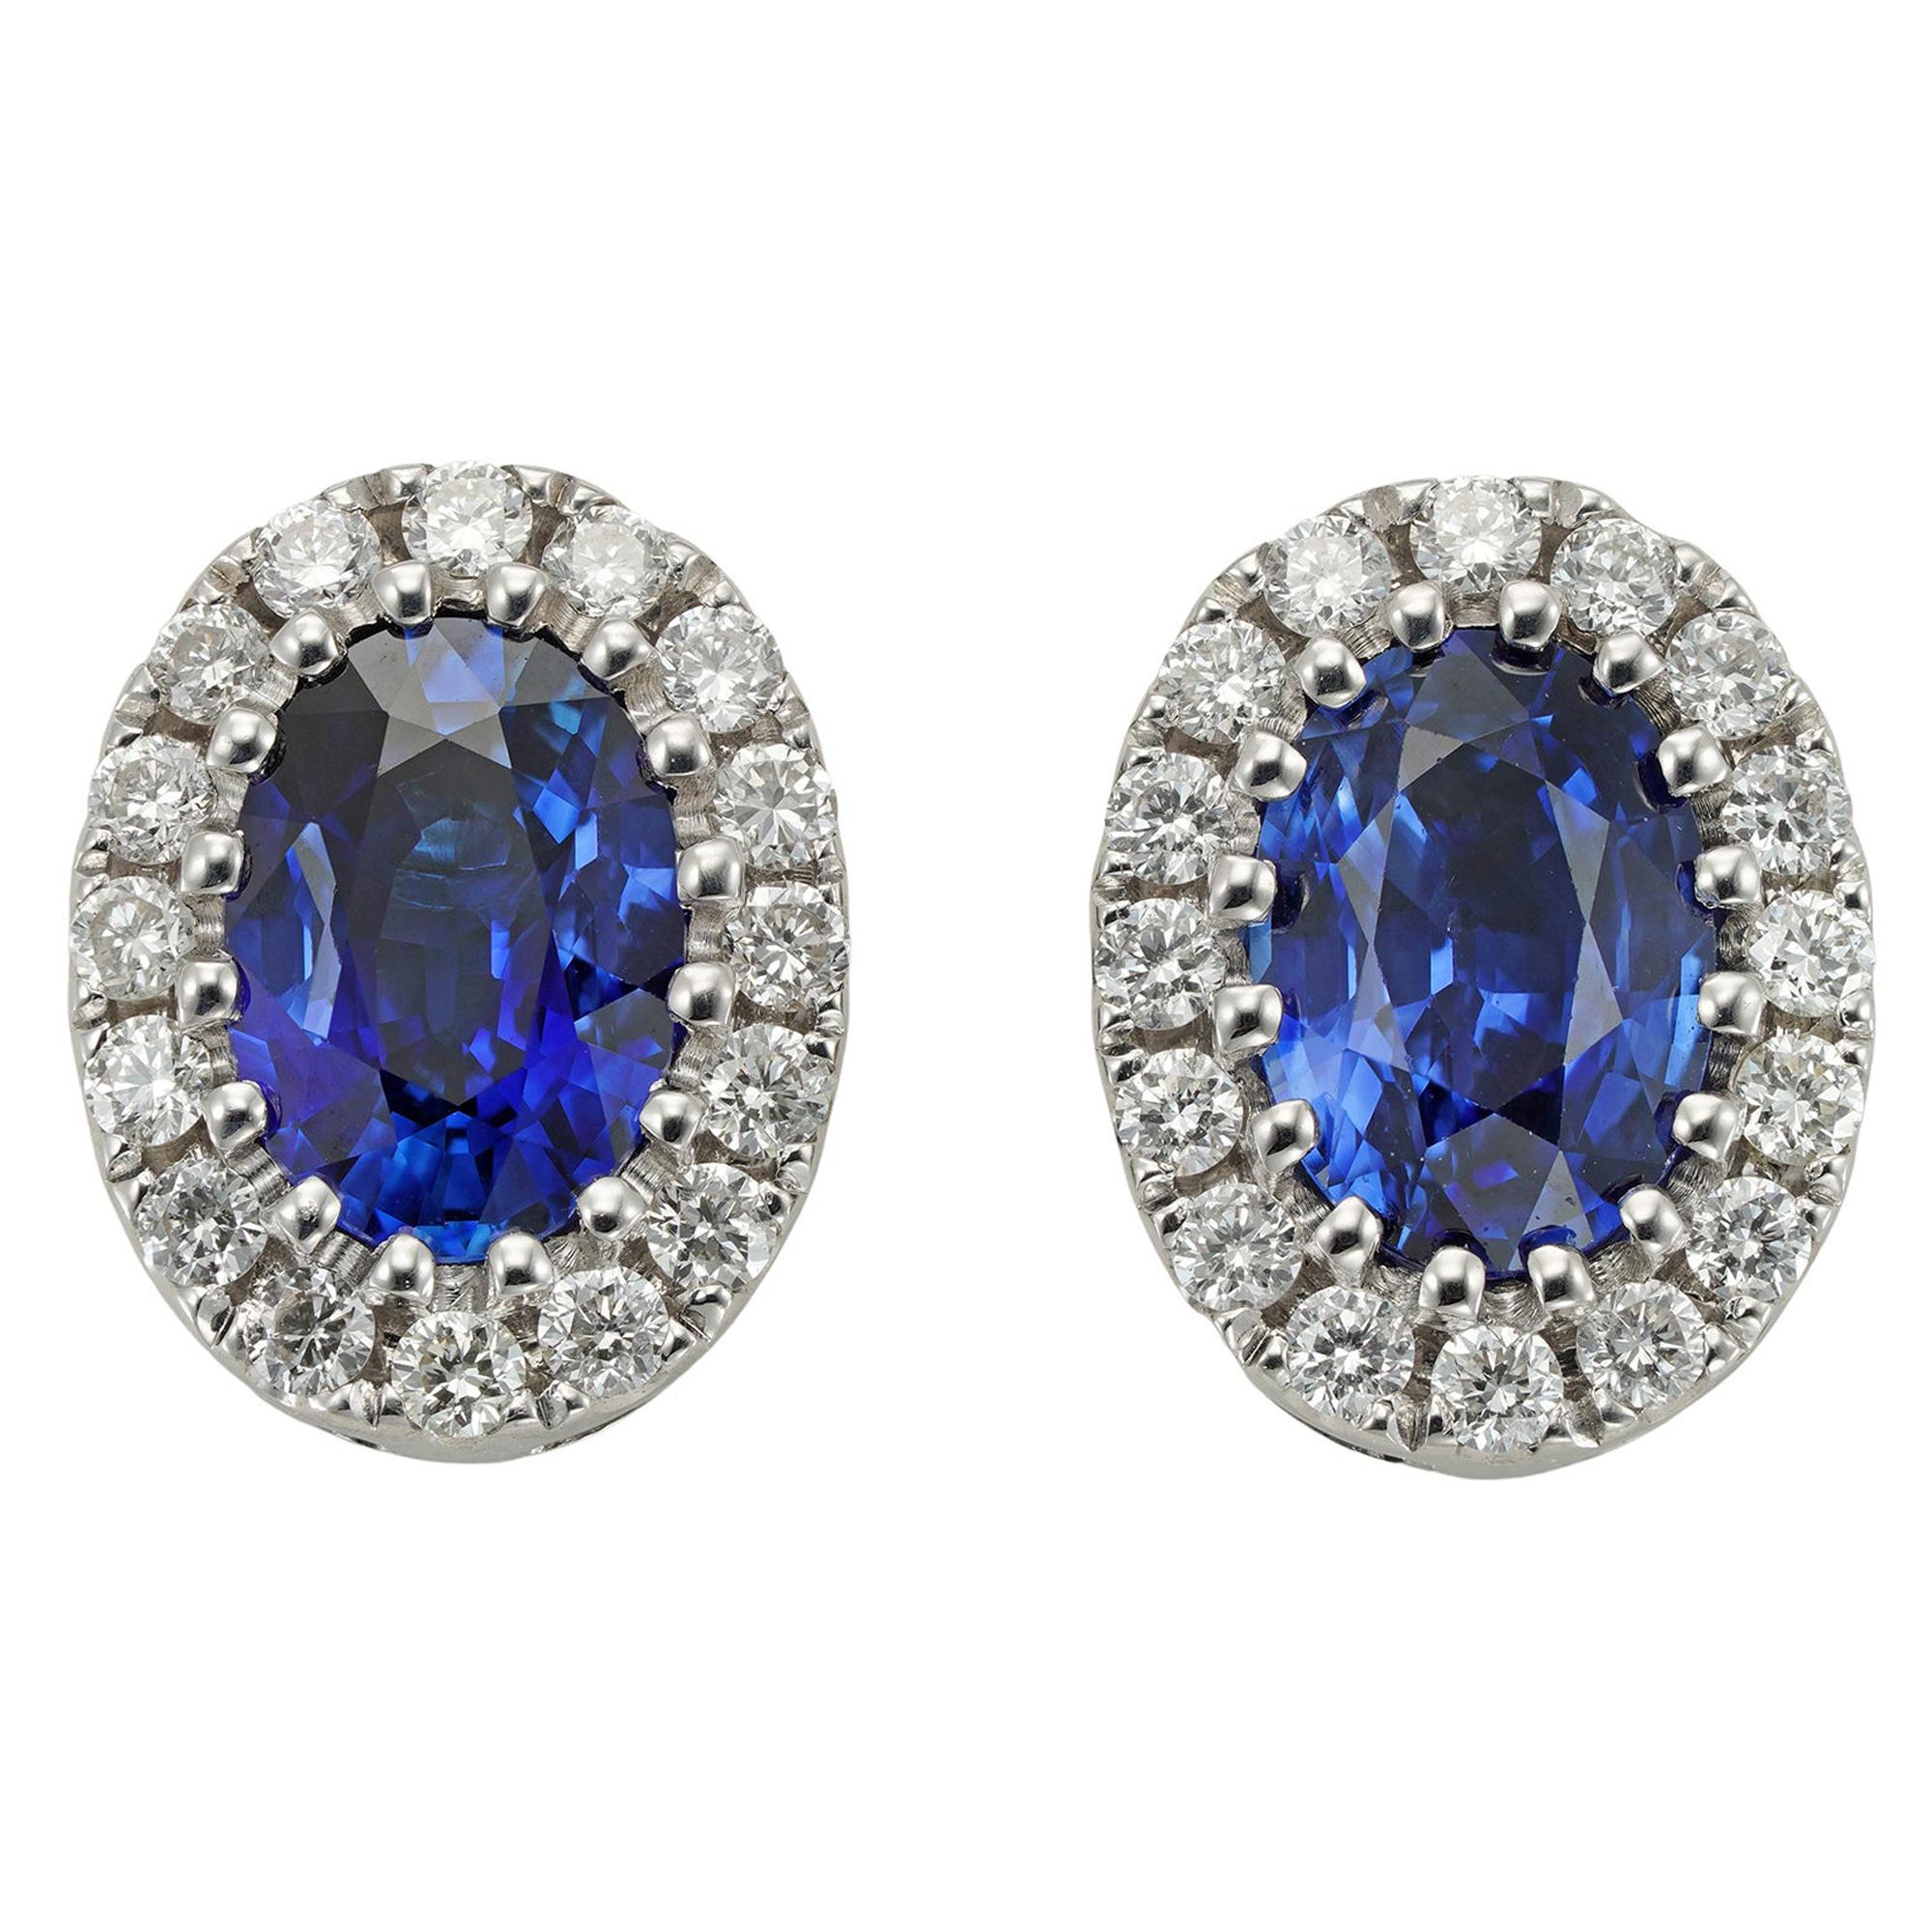 Pair of Sapphire and Diamond Cluster Earrings